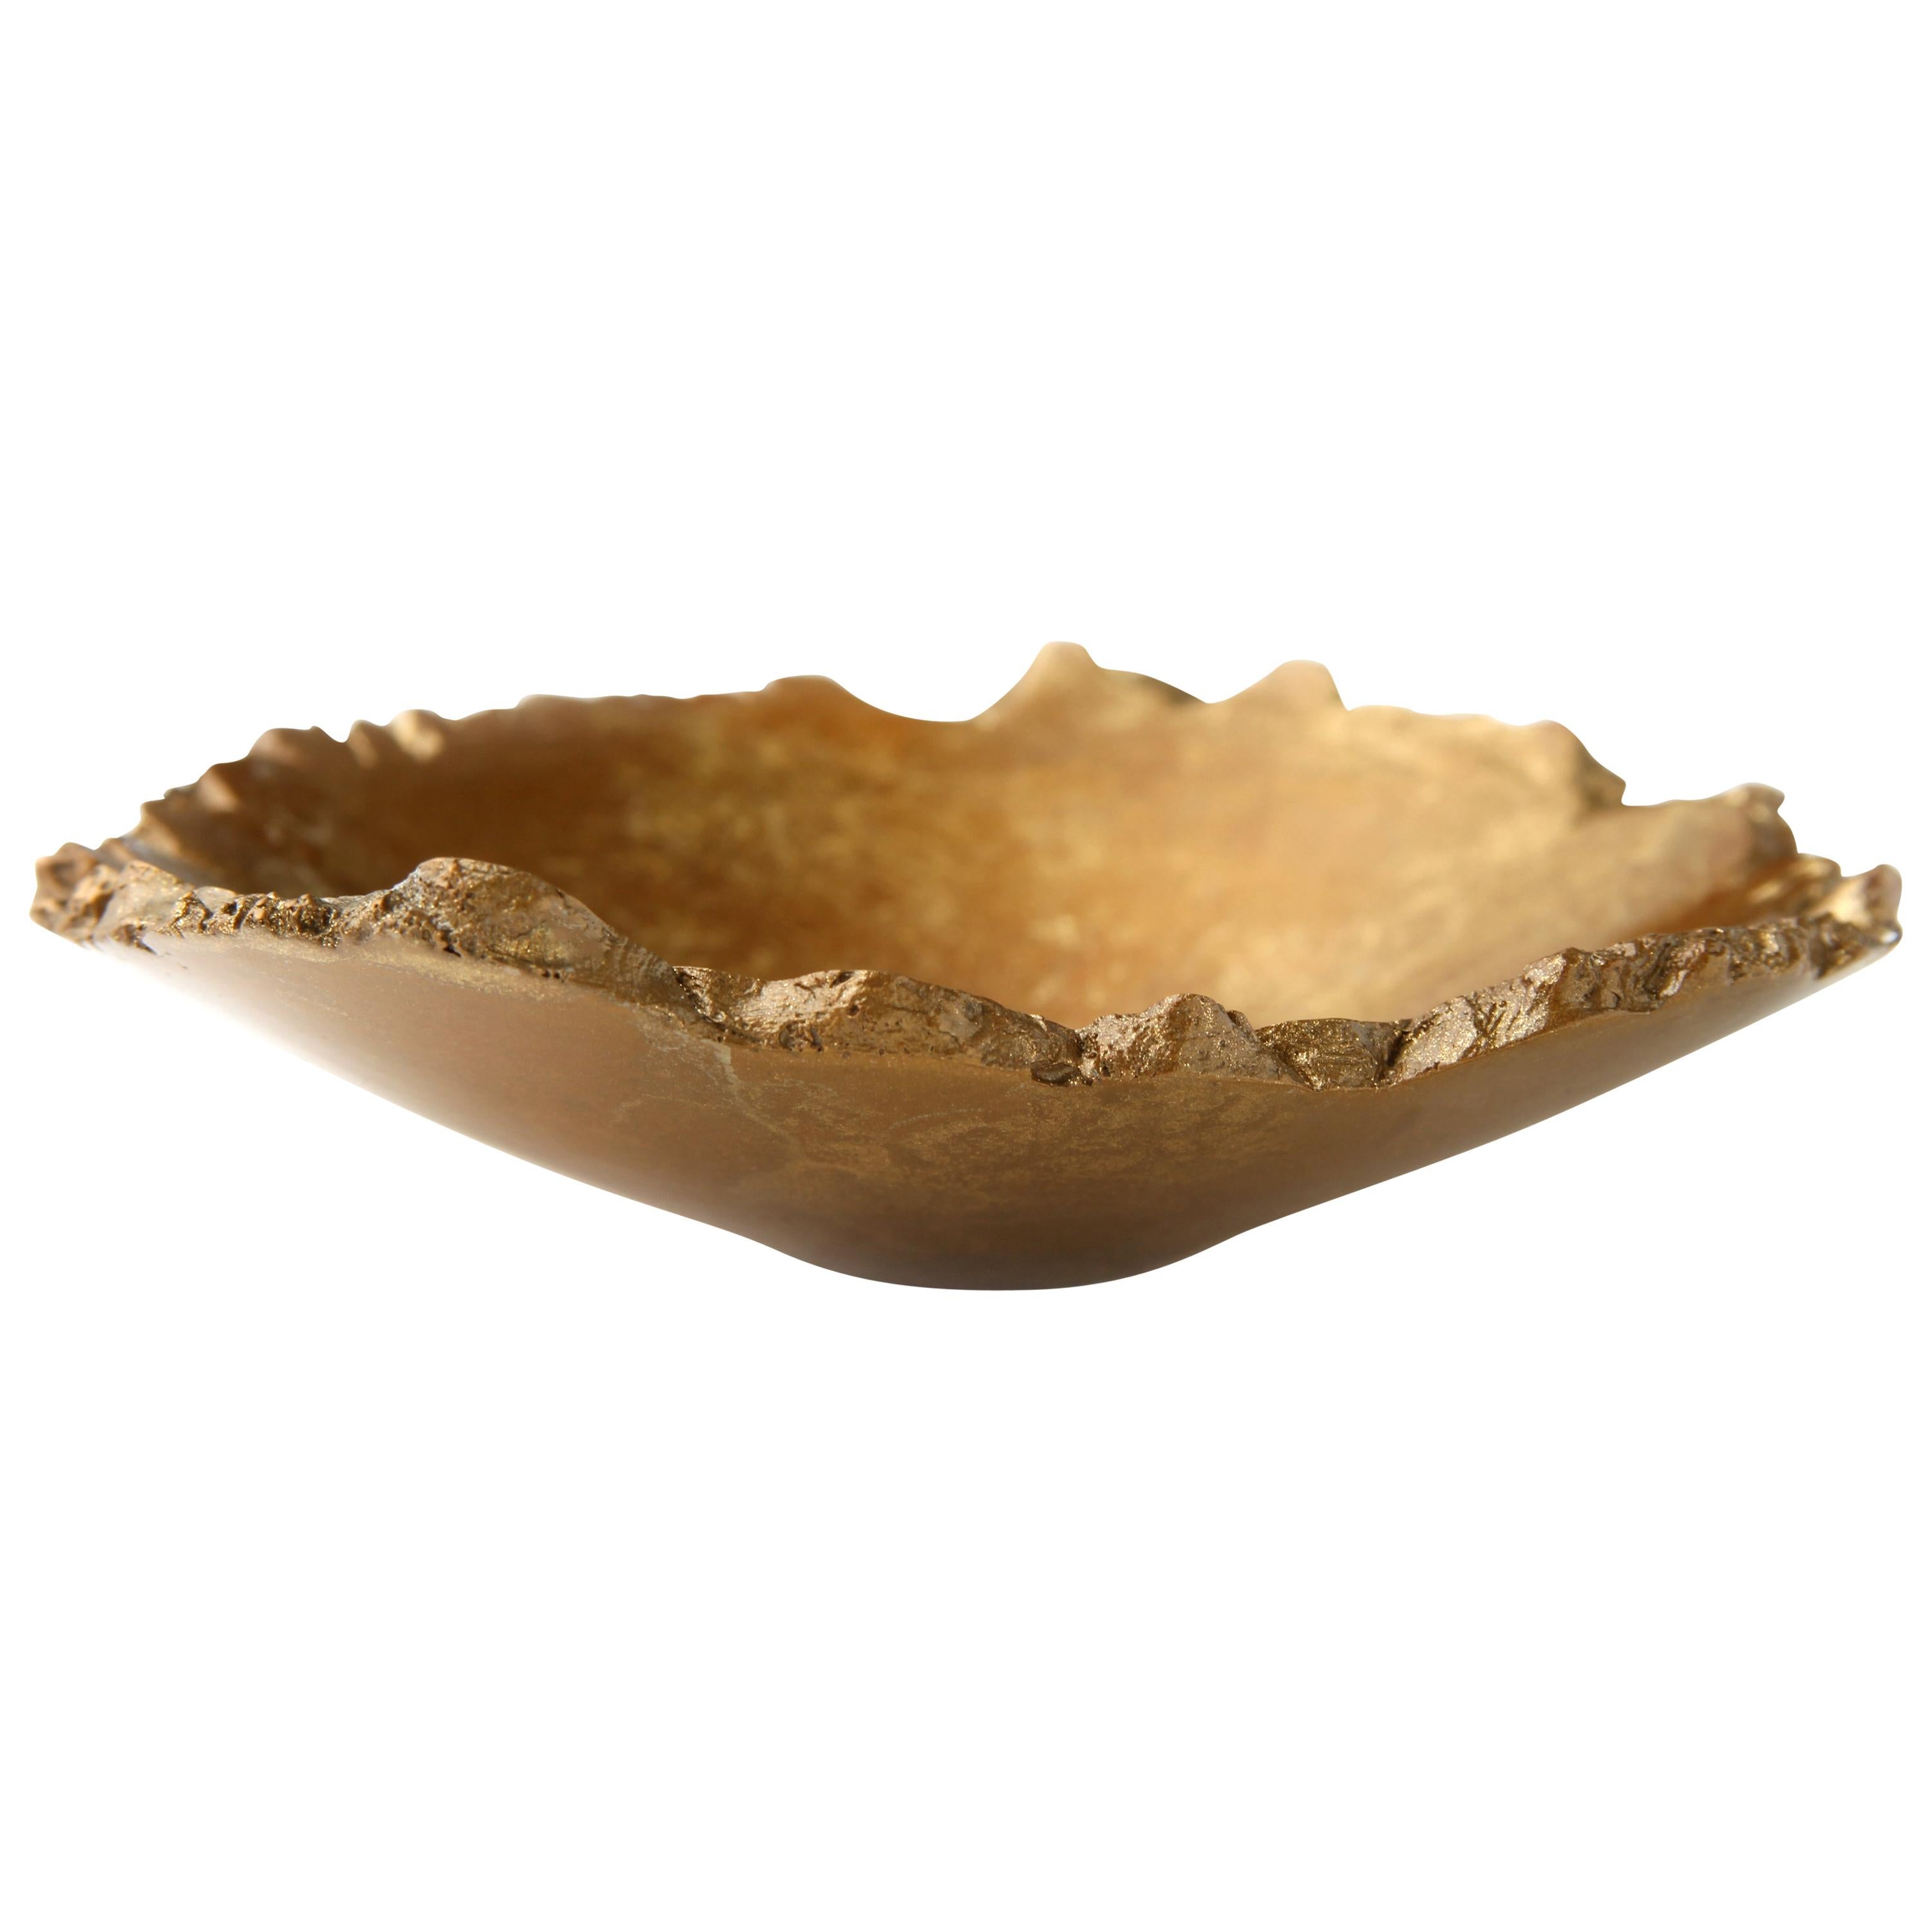 Solid Bronze "Burl" Nesting Bowl / Vessel with Natural Edge and Gold Patina im Angebot